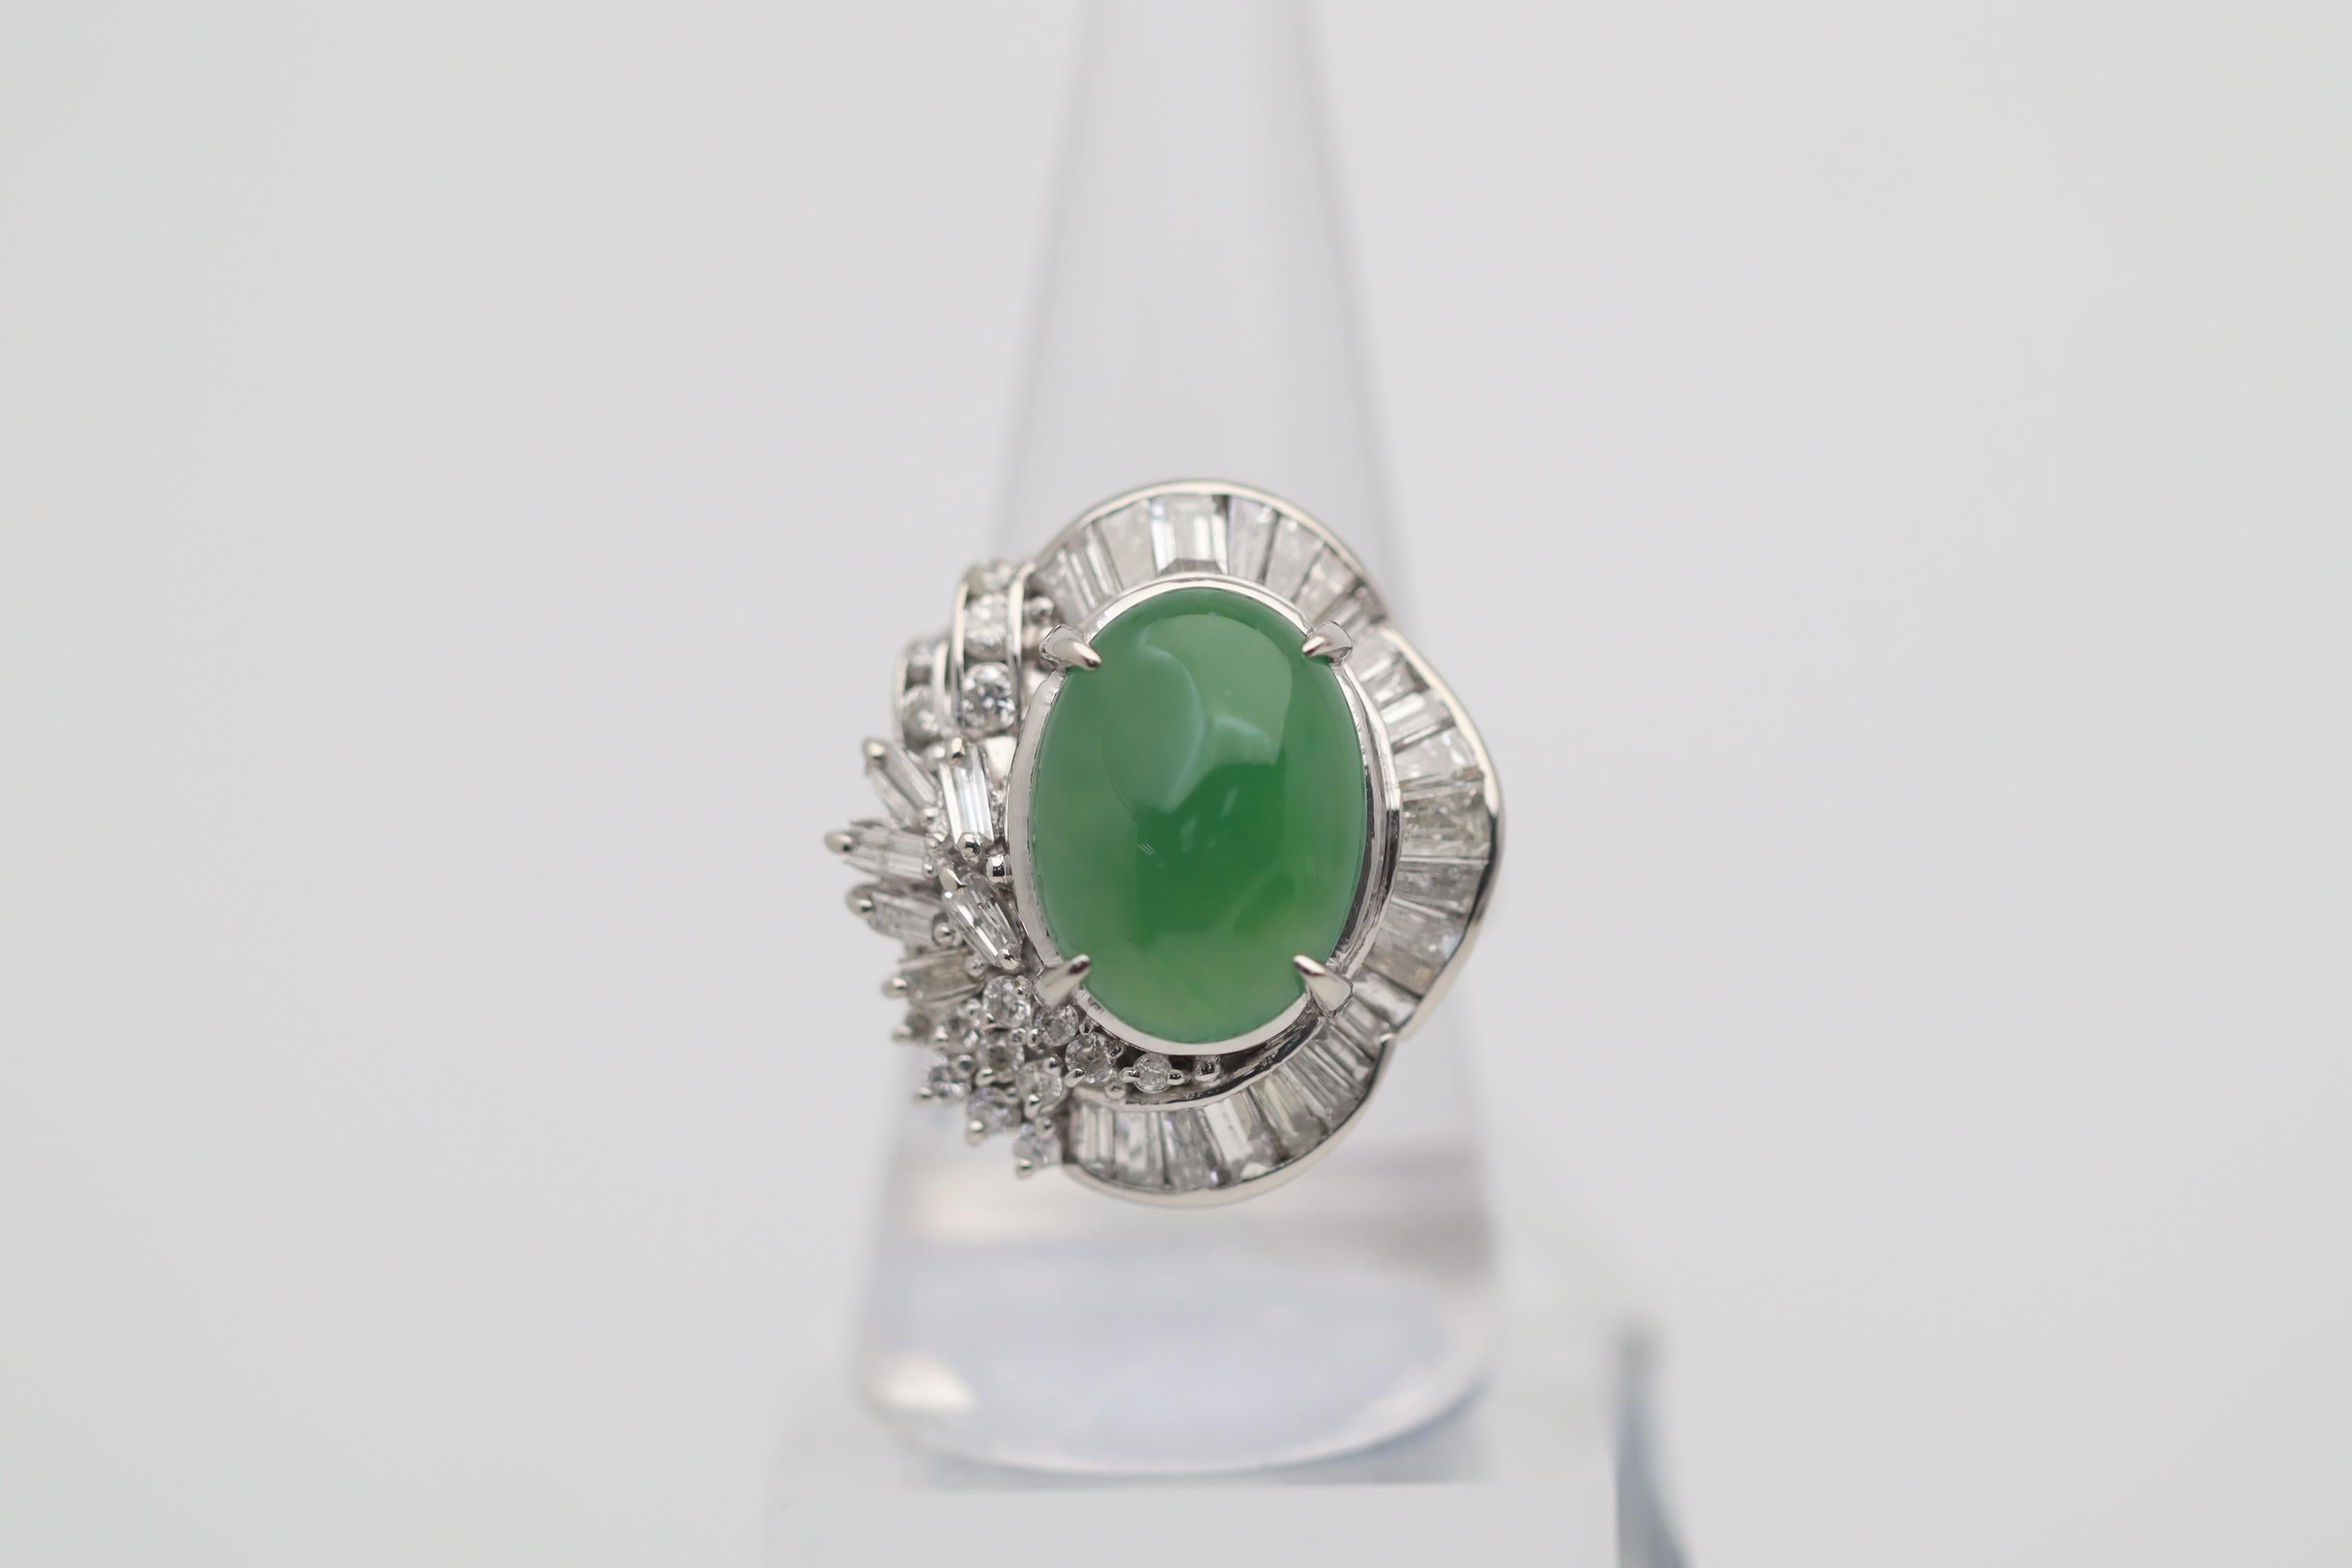 A lovely platinum made cocktail ring featuring a natural jadeite jade weighing 7.83 carats. It has a soft, even green color with excellent luster as light rolls across its surface. It is complemented by a cluster of baguette and round brilliant-cut